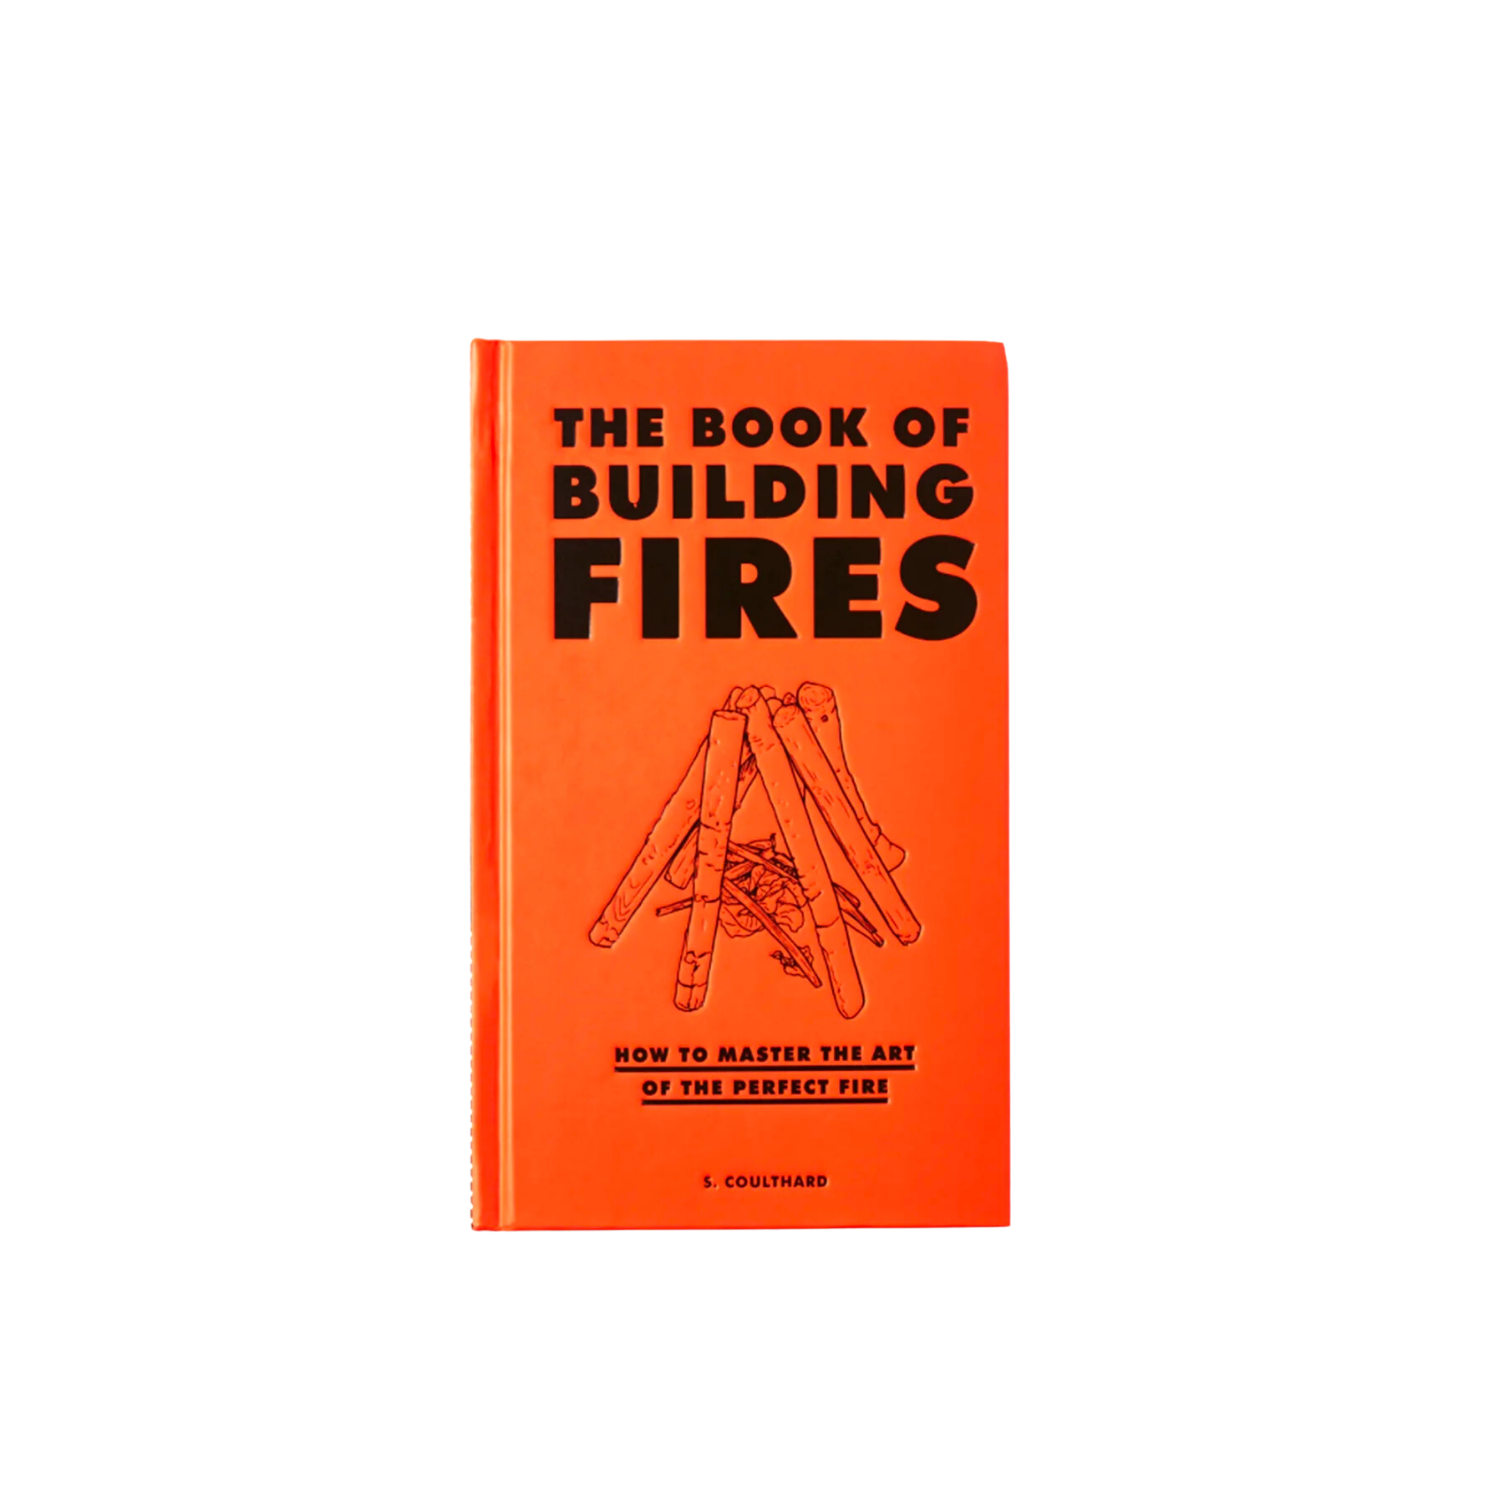 The book of building fires: s. coulthard